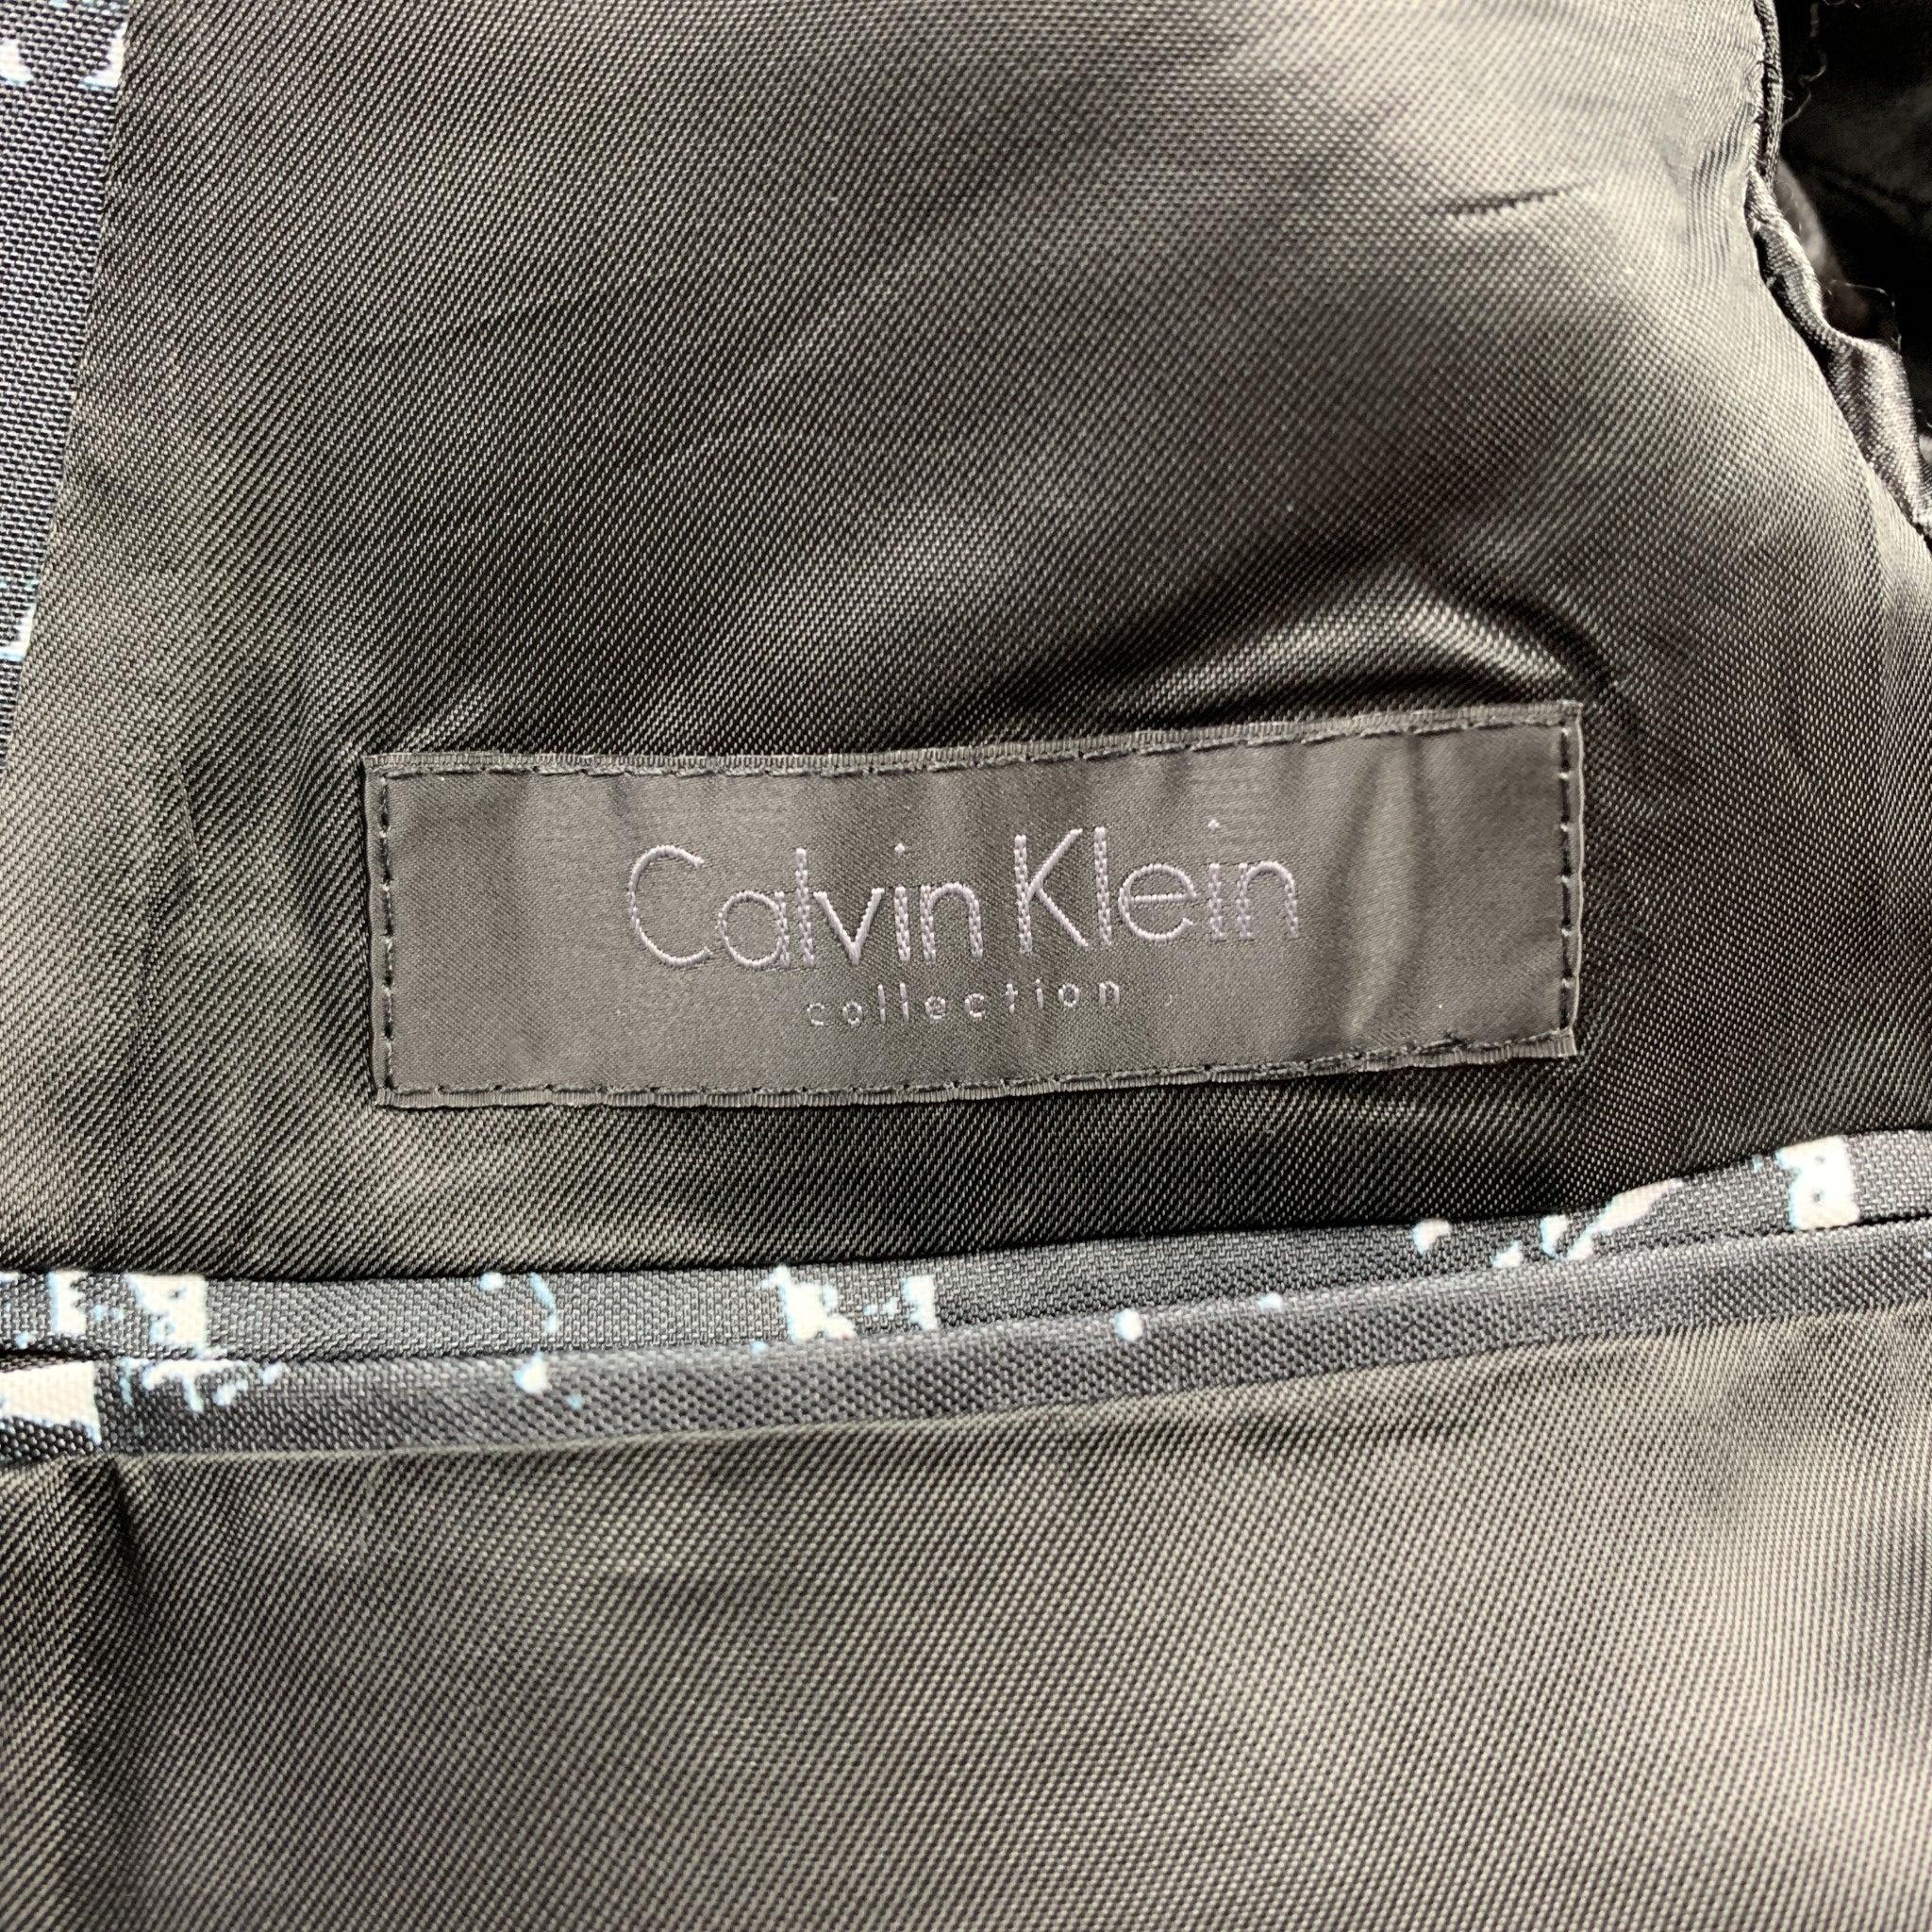 CALVIN KLEIN COLLECTION Size 40 Black & White Print Polyester Sport Coat For Sale 3